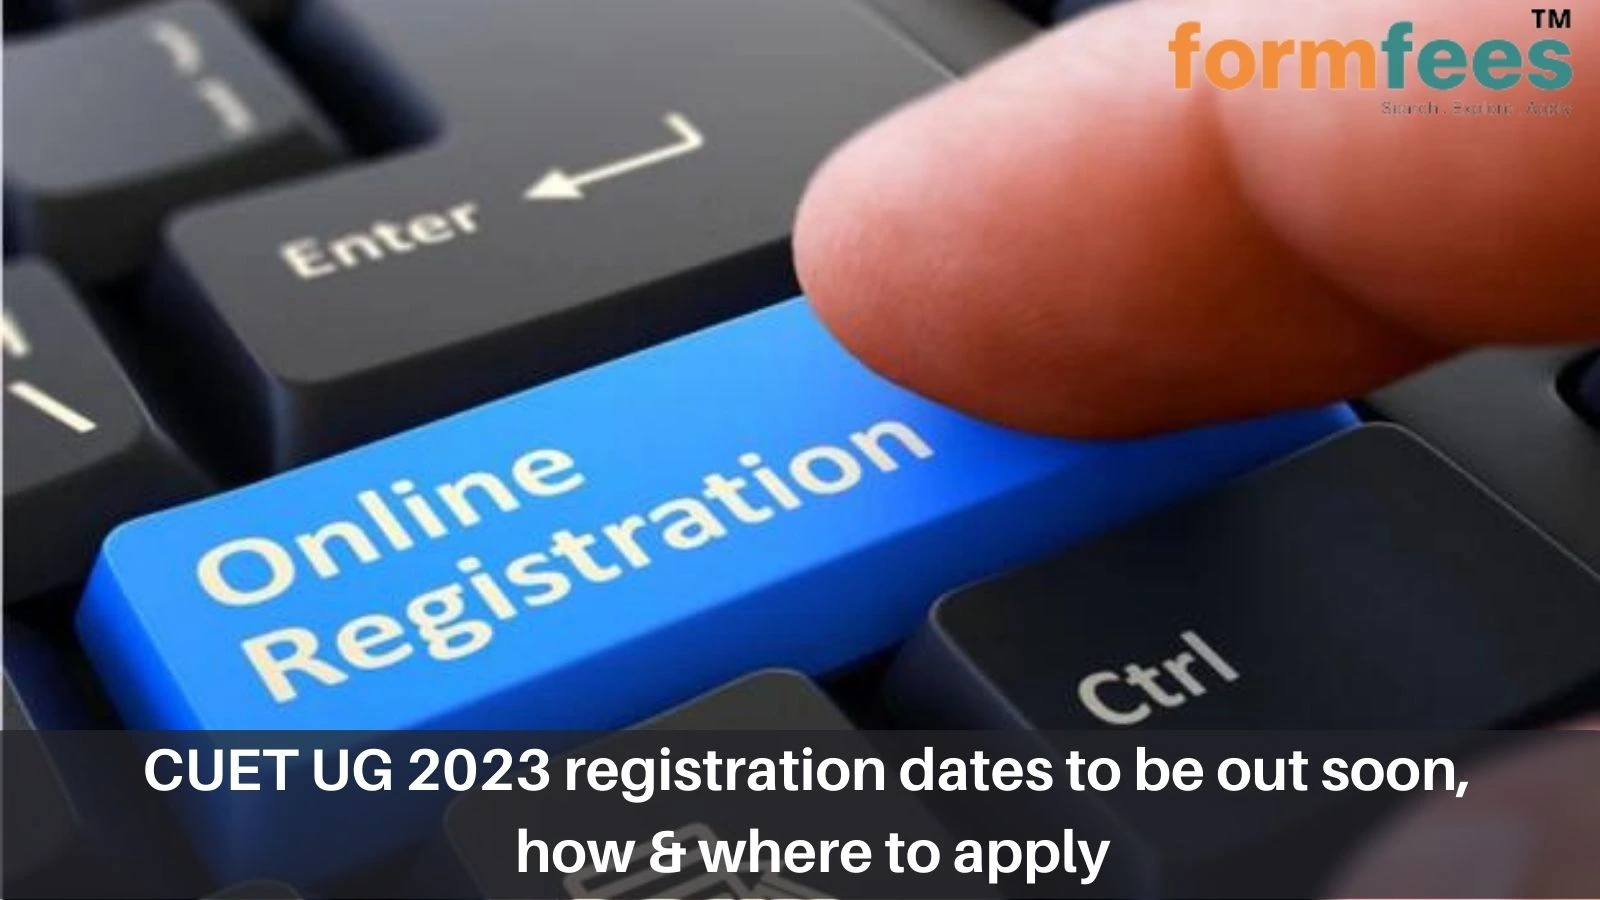 CUET UG 2023 registration dates to be out soon, how & where to apply